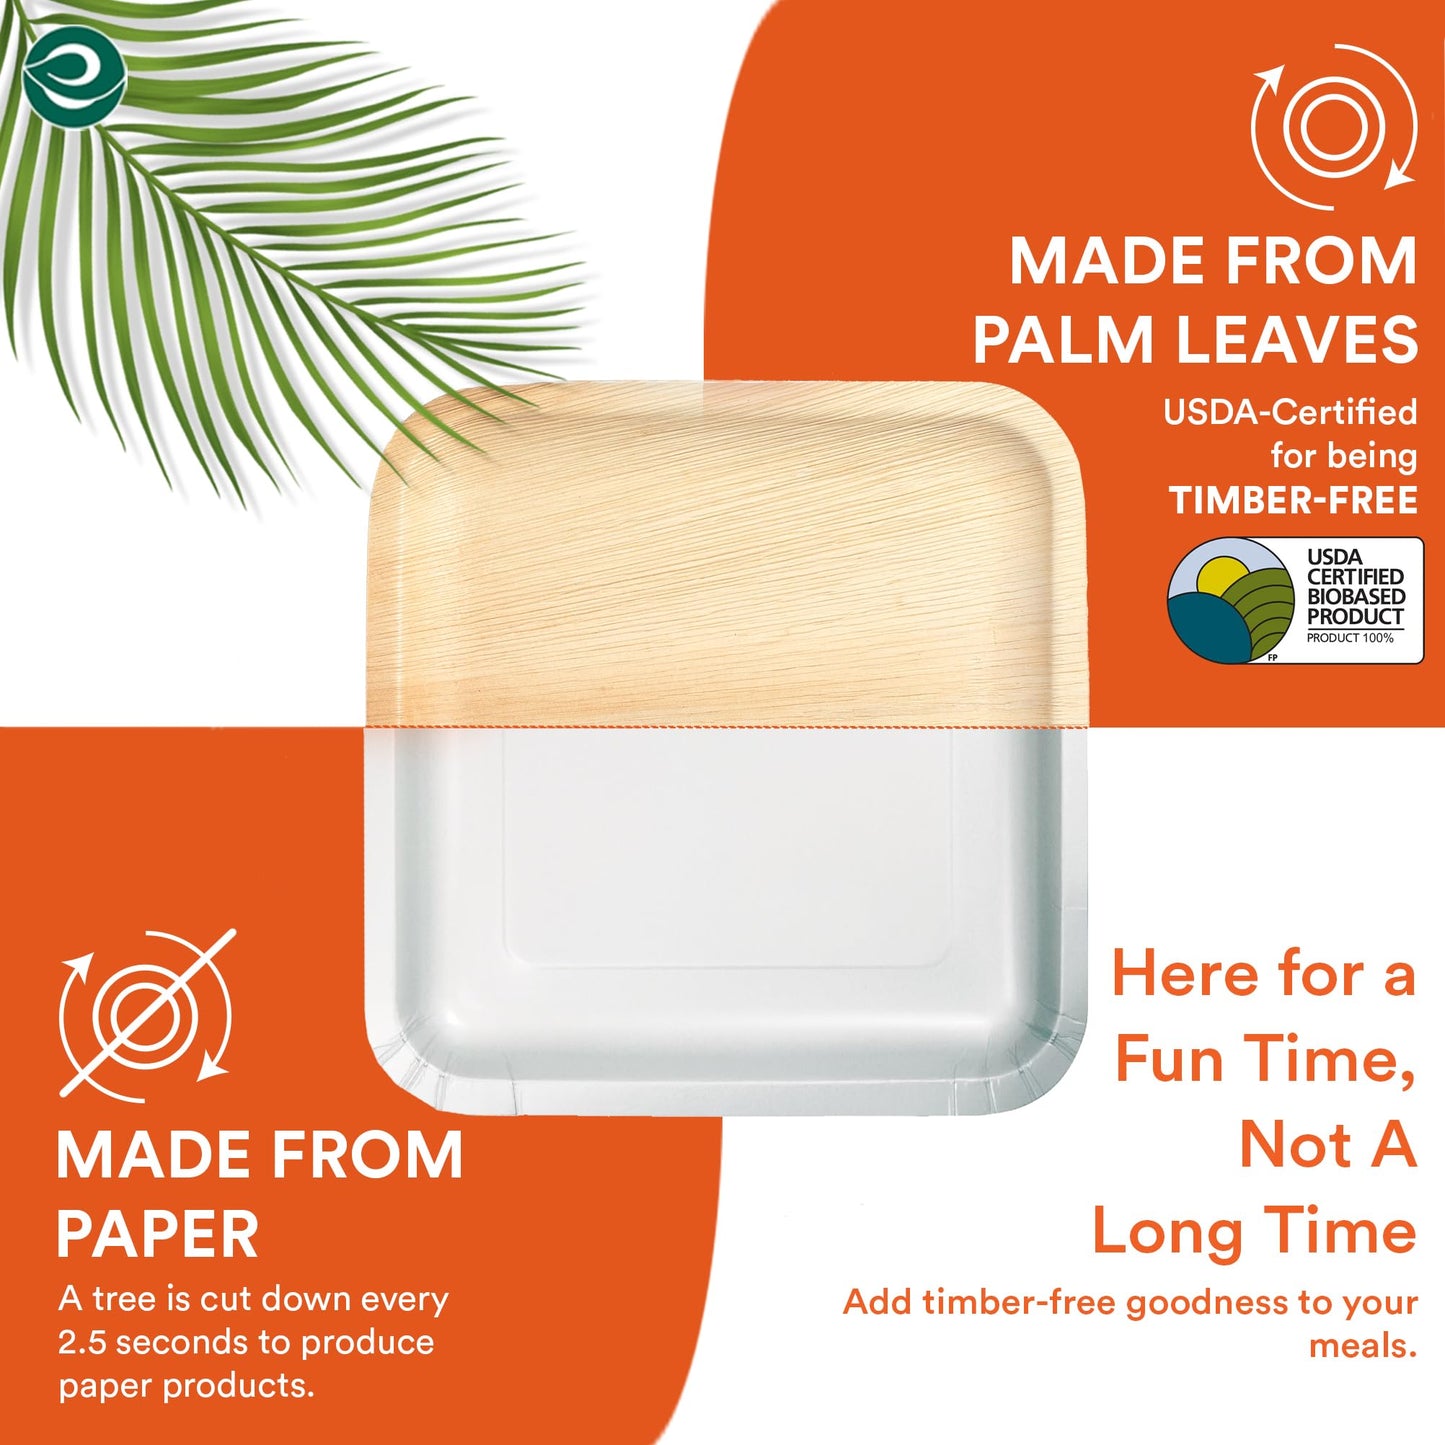 Compostable 6 Inch Palm Leaf Square Plates (50 Count)